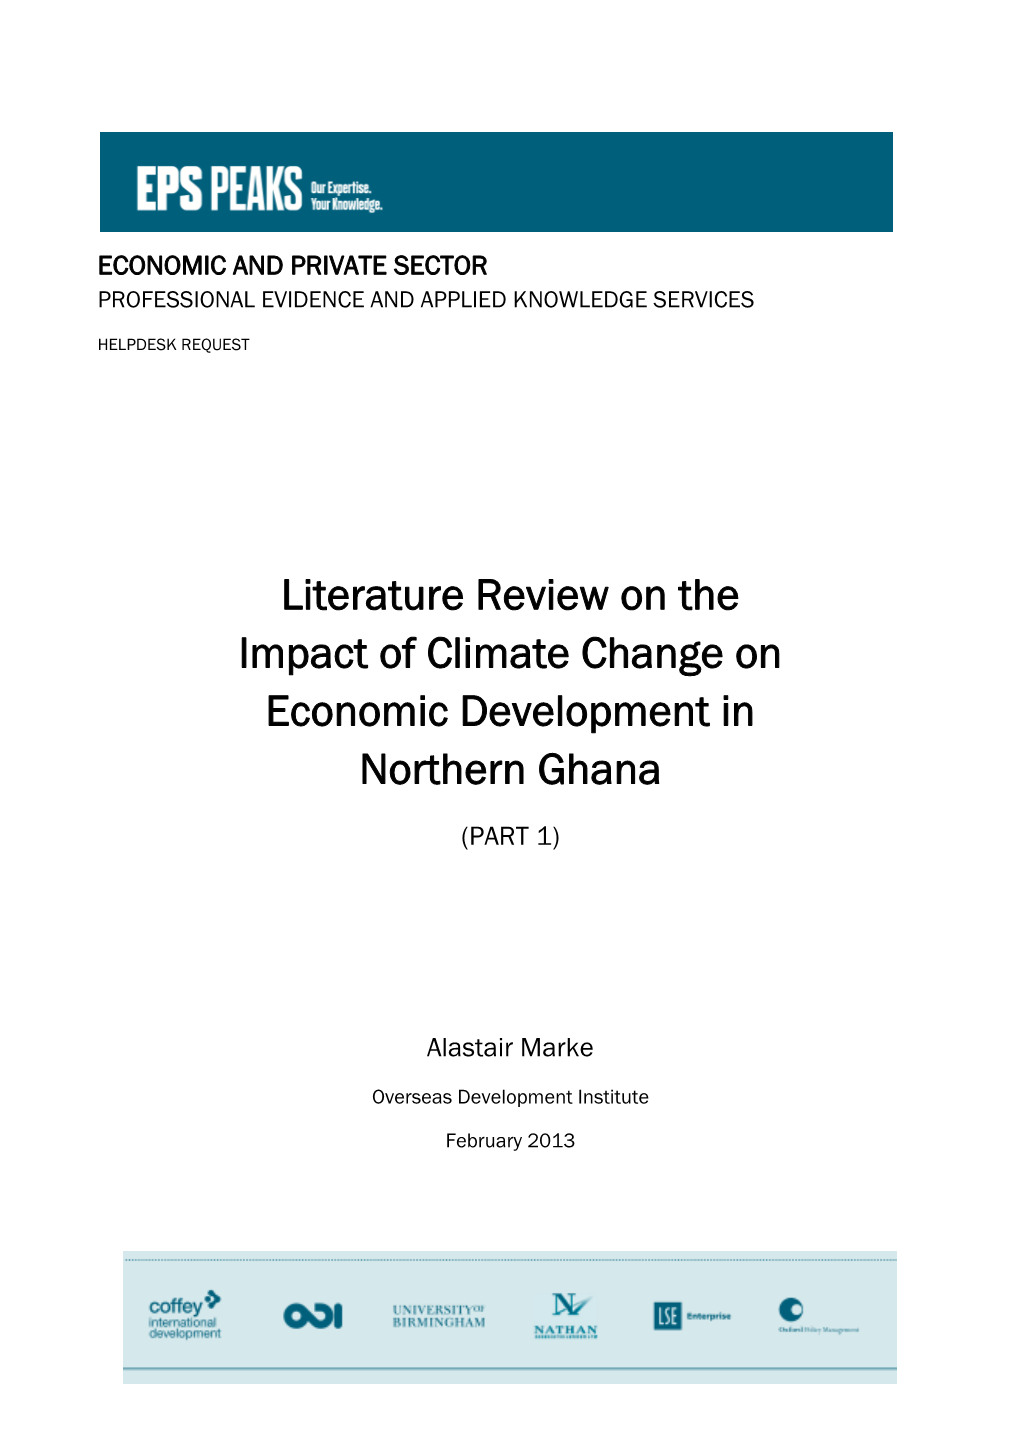 Literature Review on the Impact of Climate Change on Economic Development in Northern Ghana